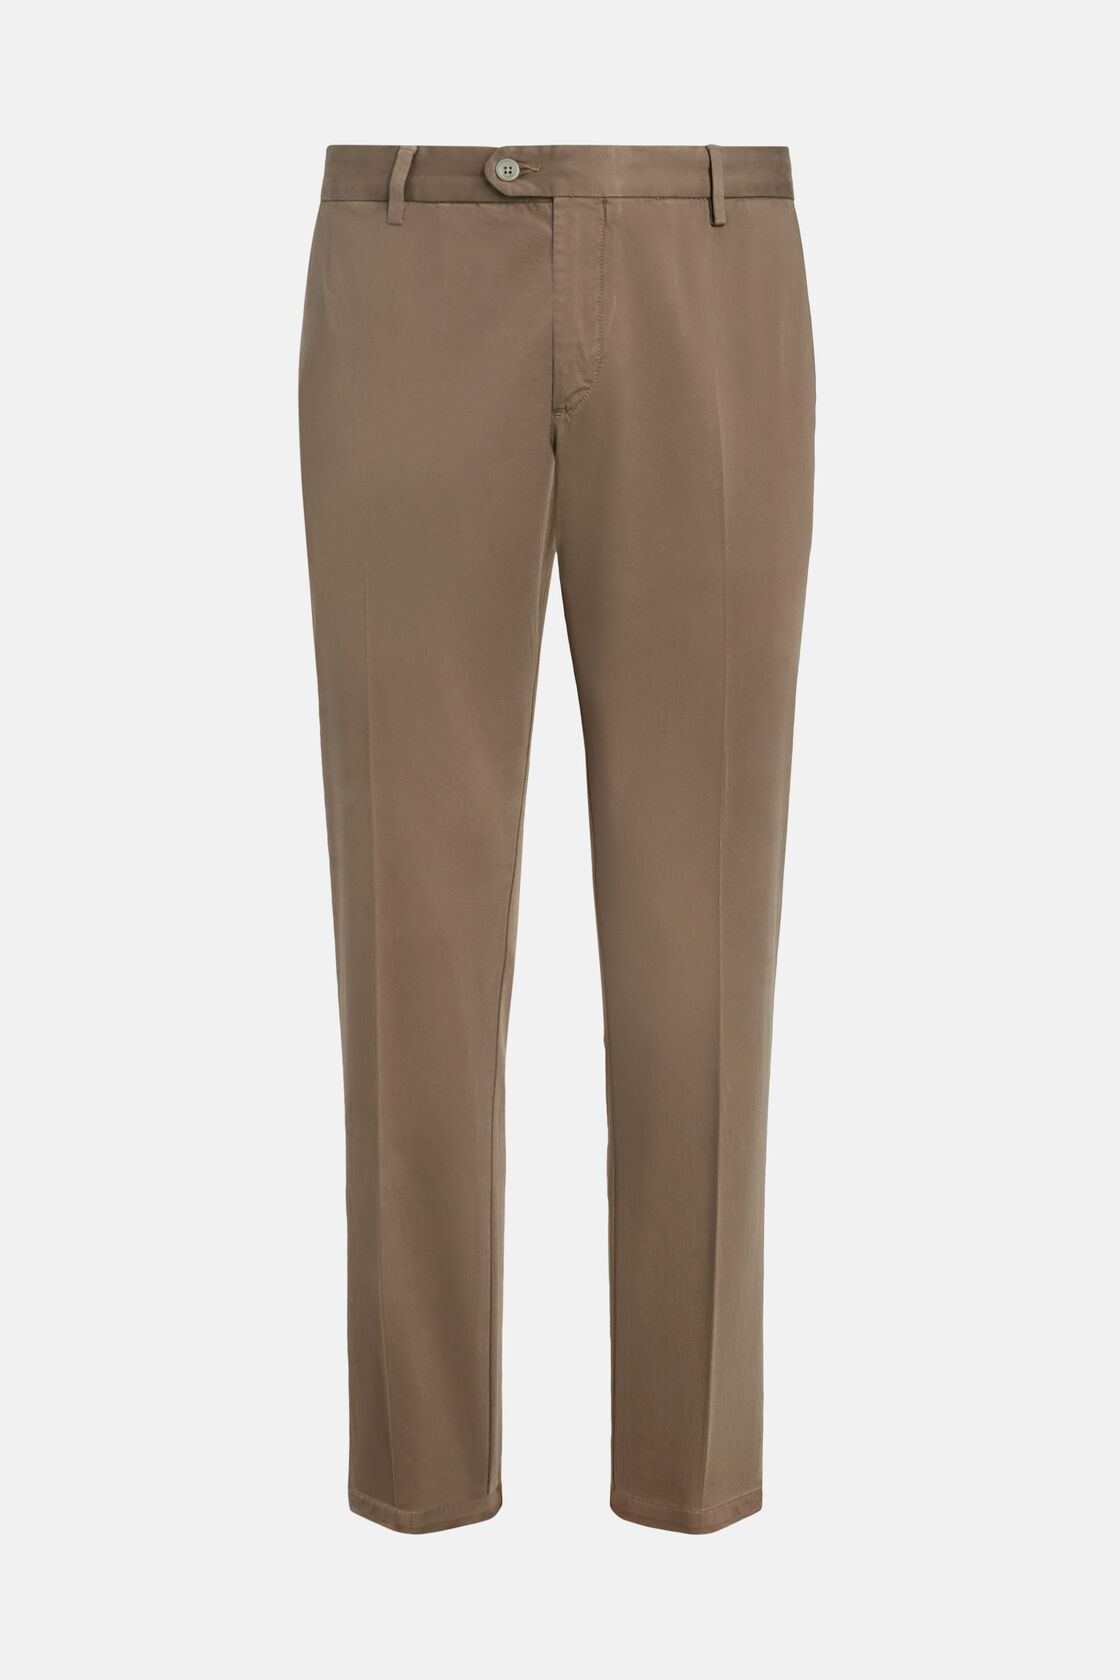 Stretch satin trousers, Taupe, hi-res